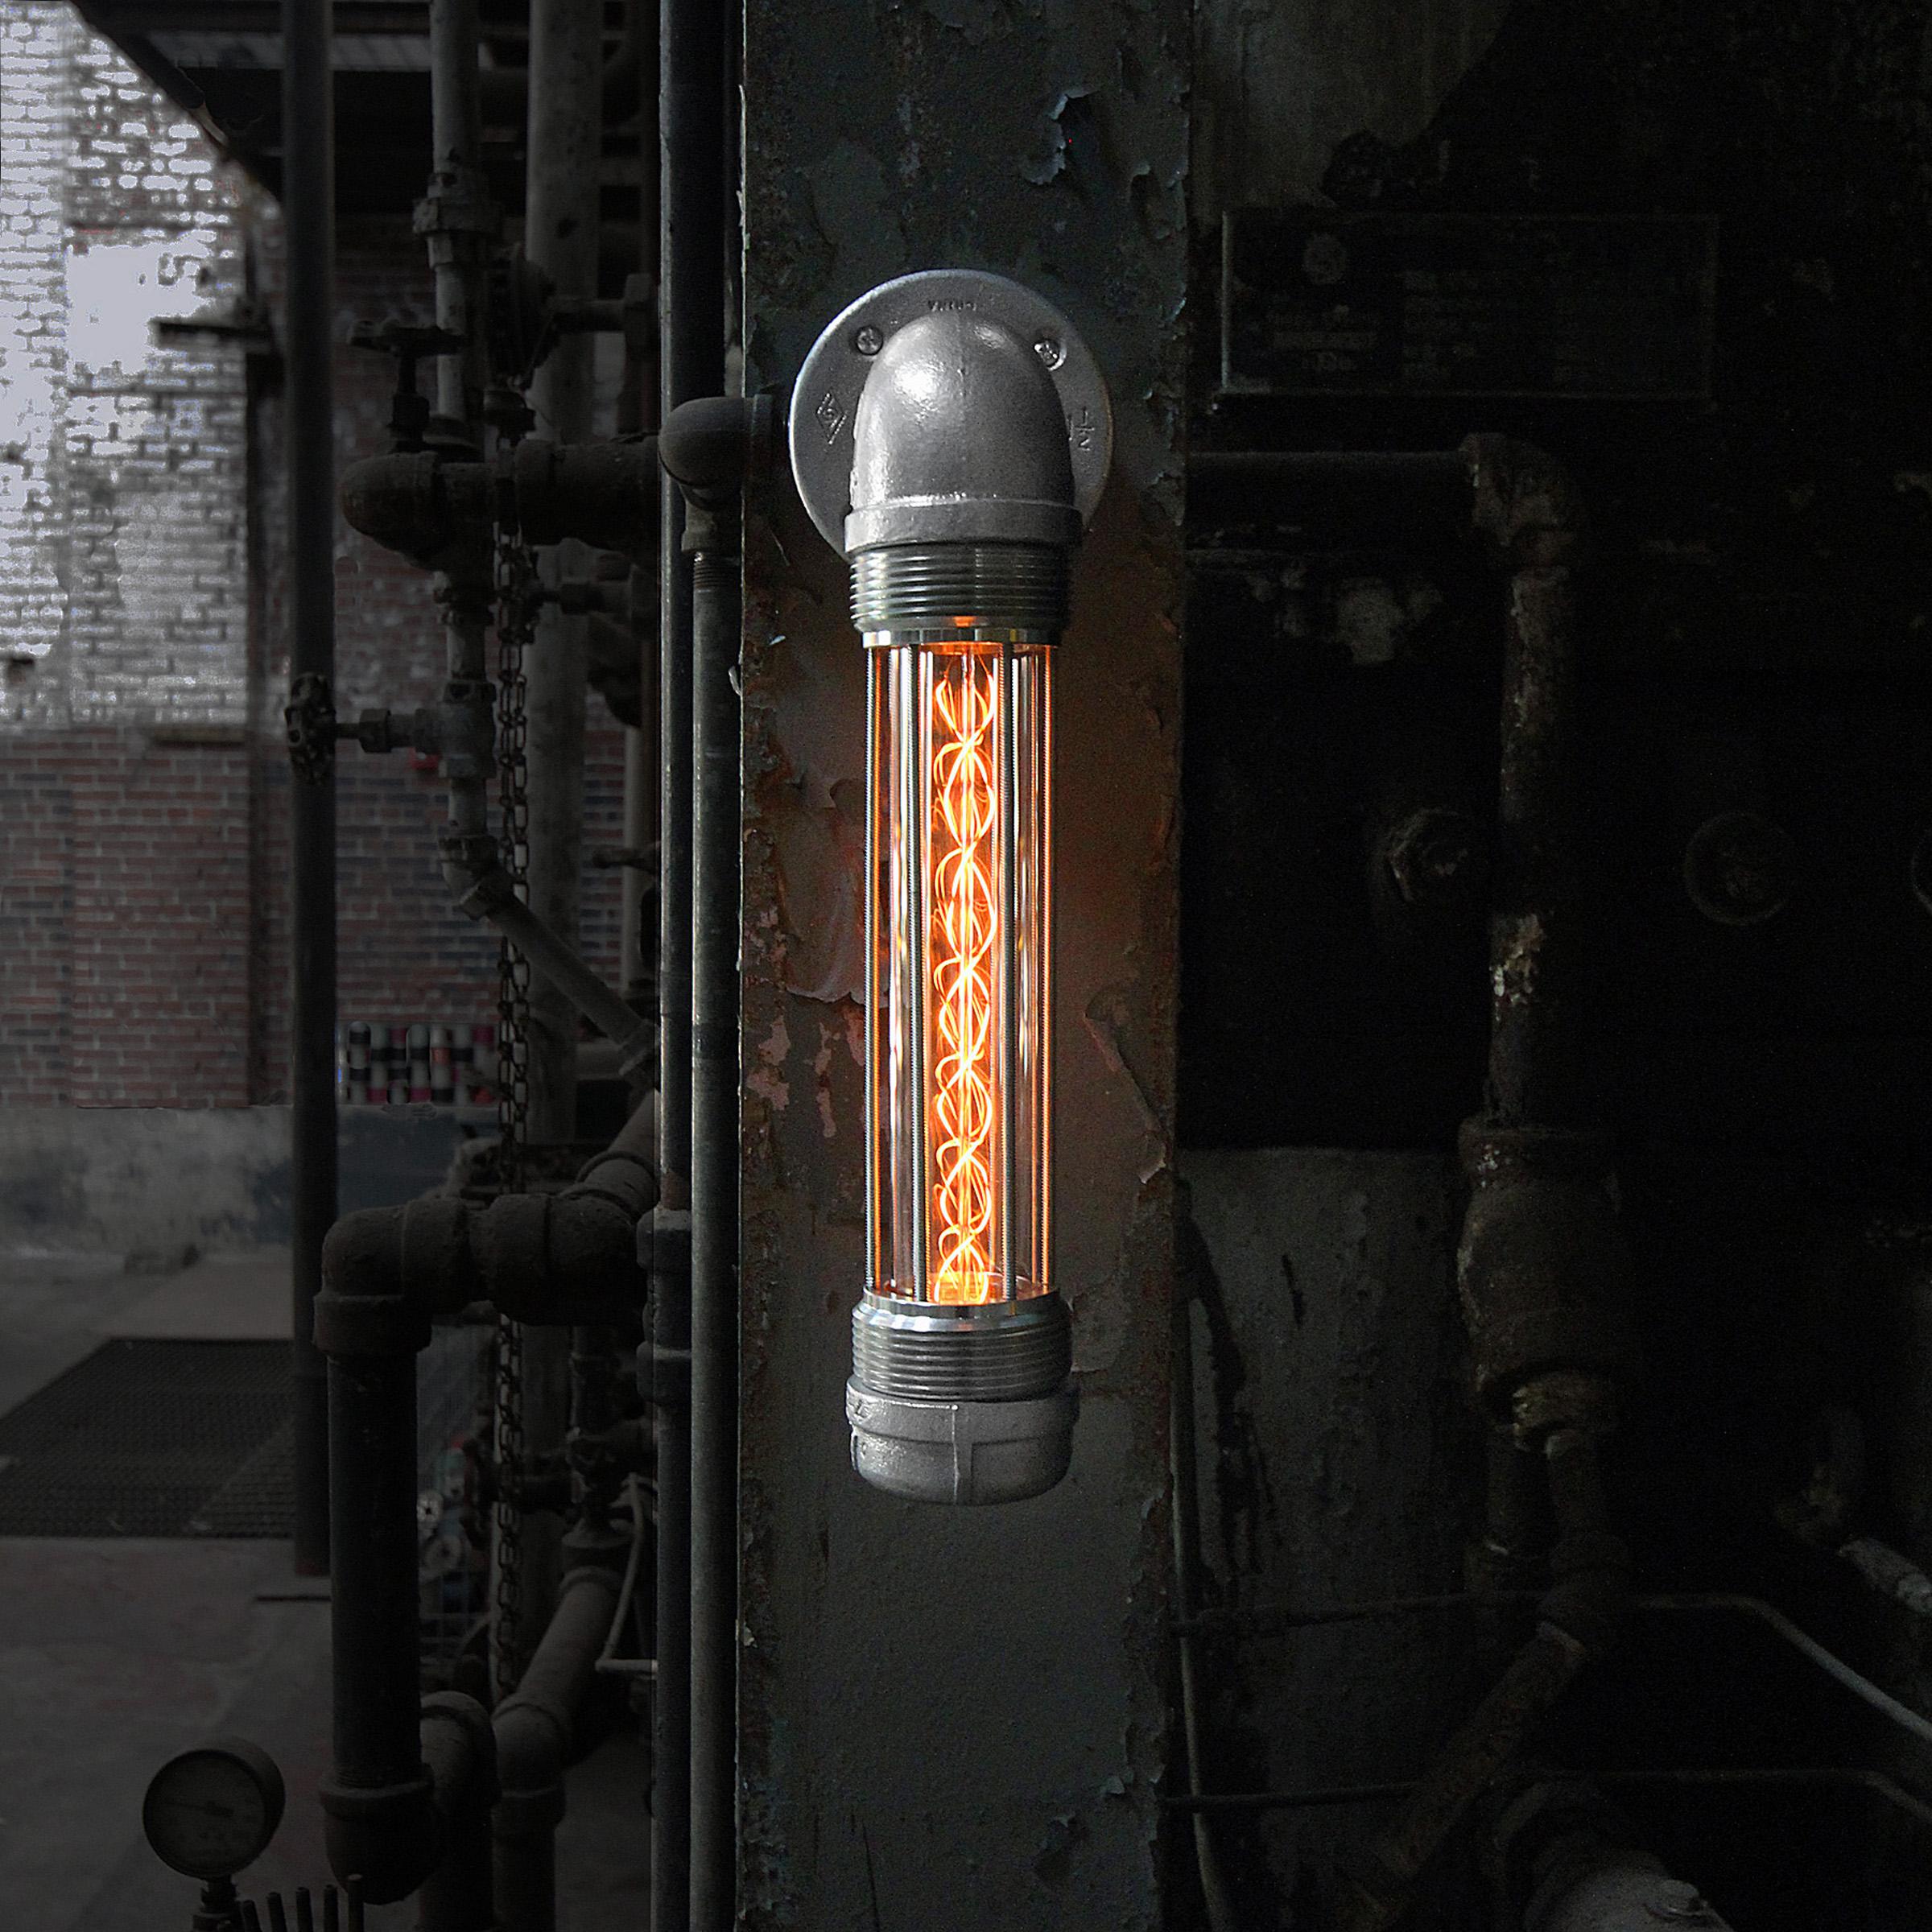 The Glow Worm modern industrial wall sconce boasts one of our patented industrial light modules which can be oriented to extend in either direction to create a warm and moody glow to illuminate your industrial decor or light the way in a hallway. 